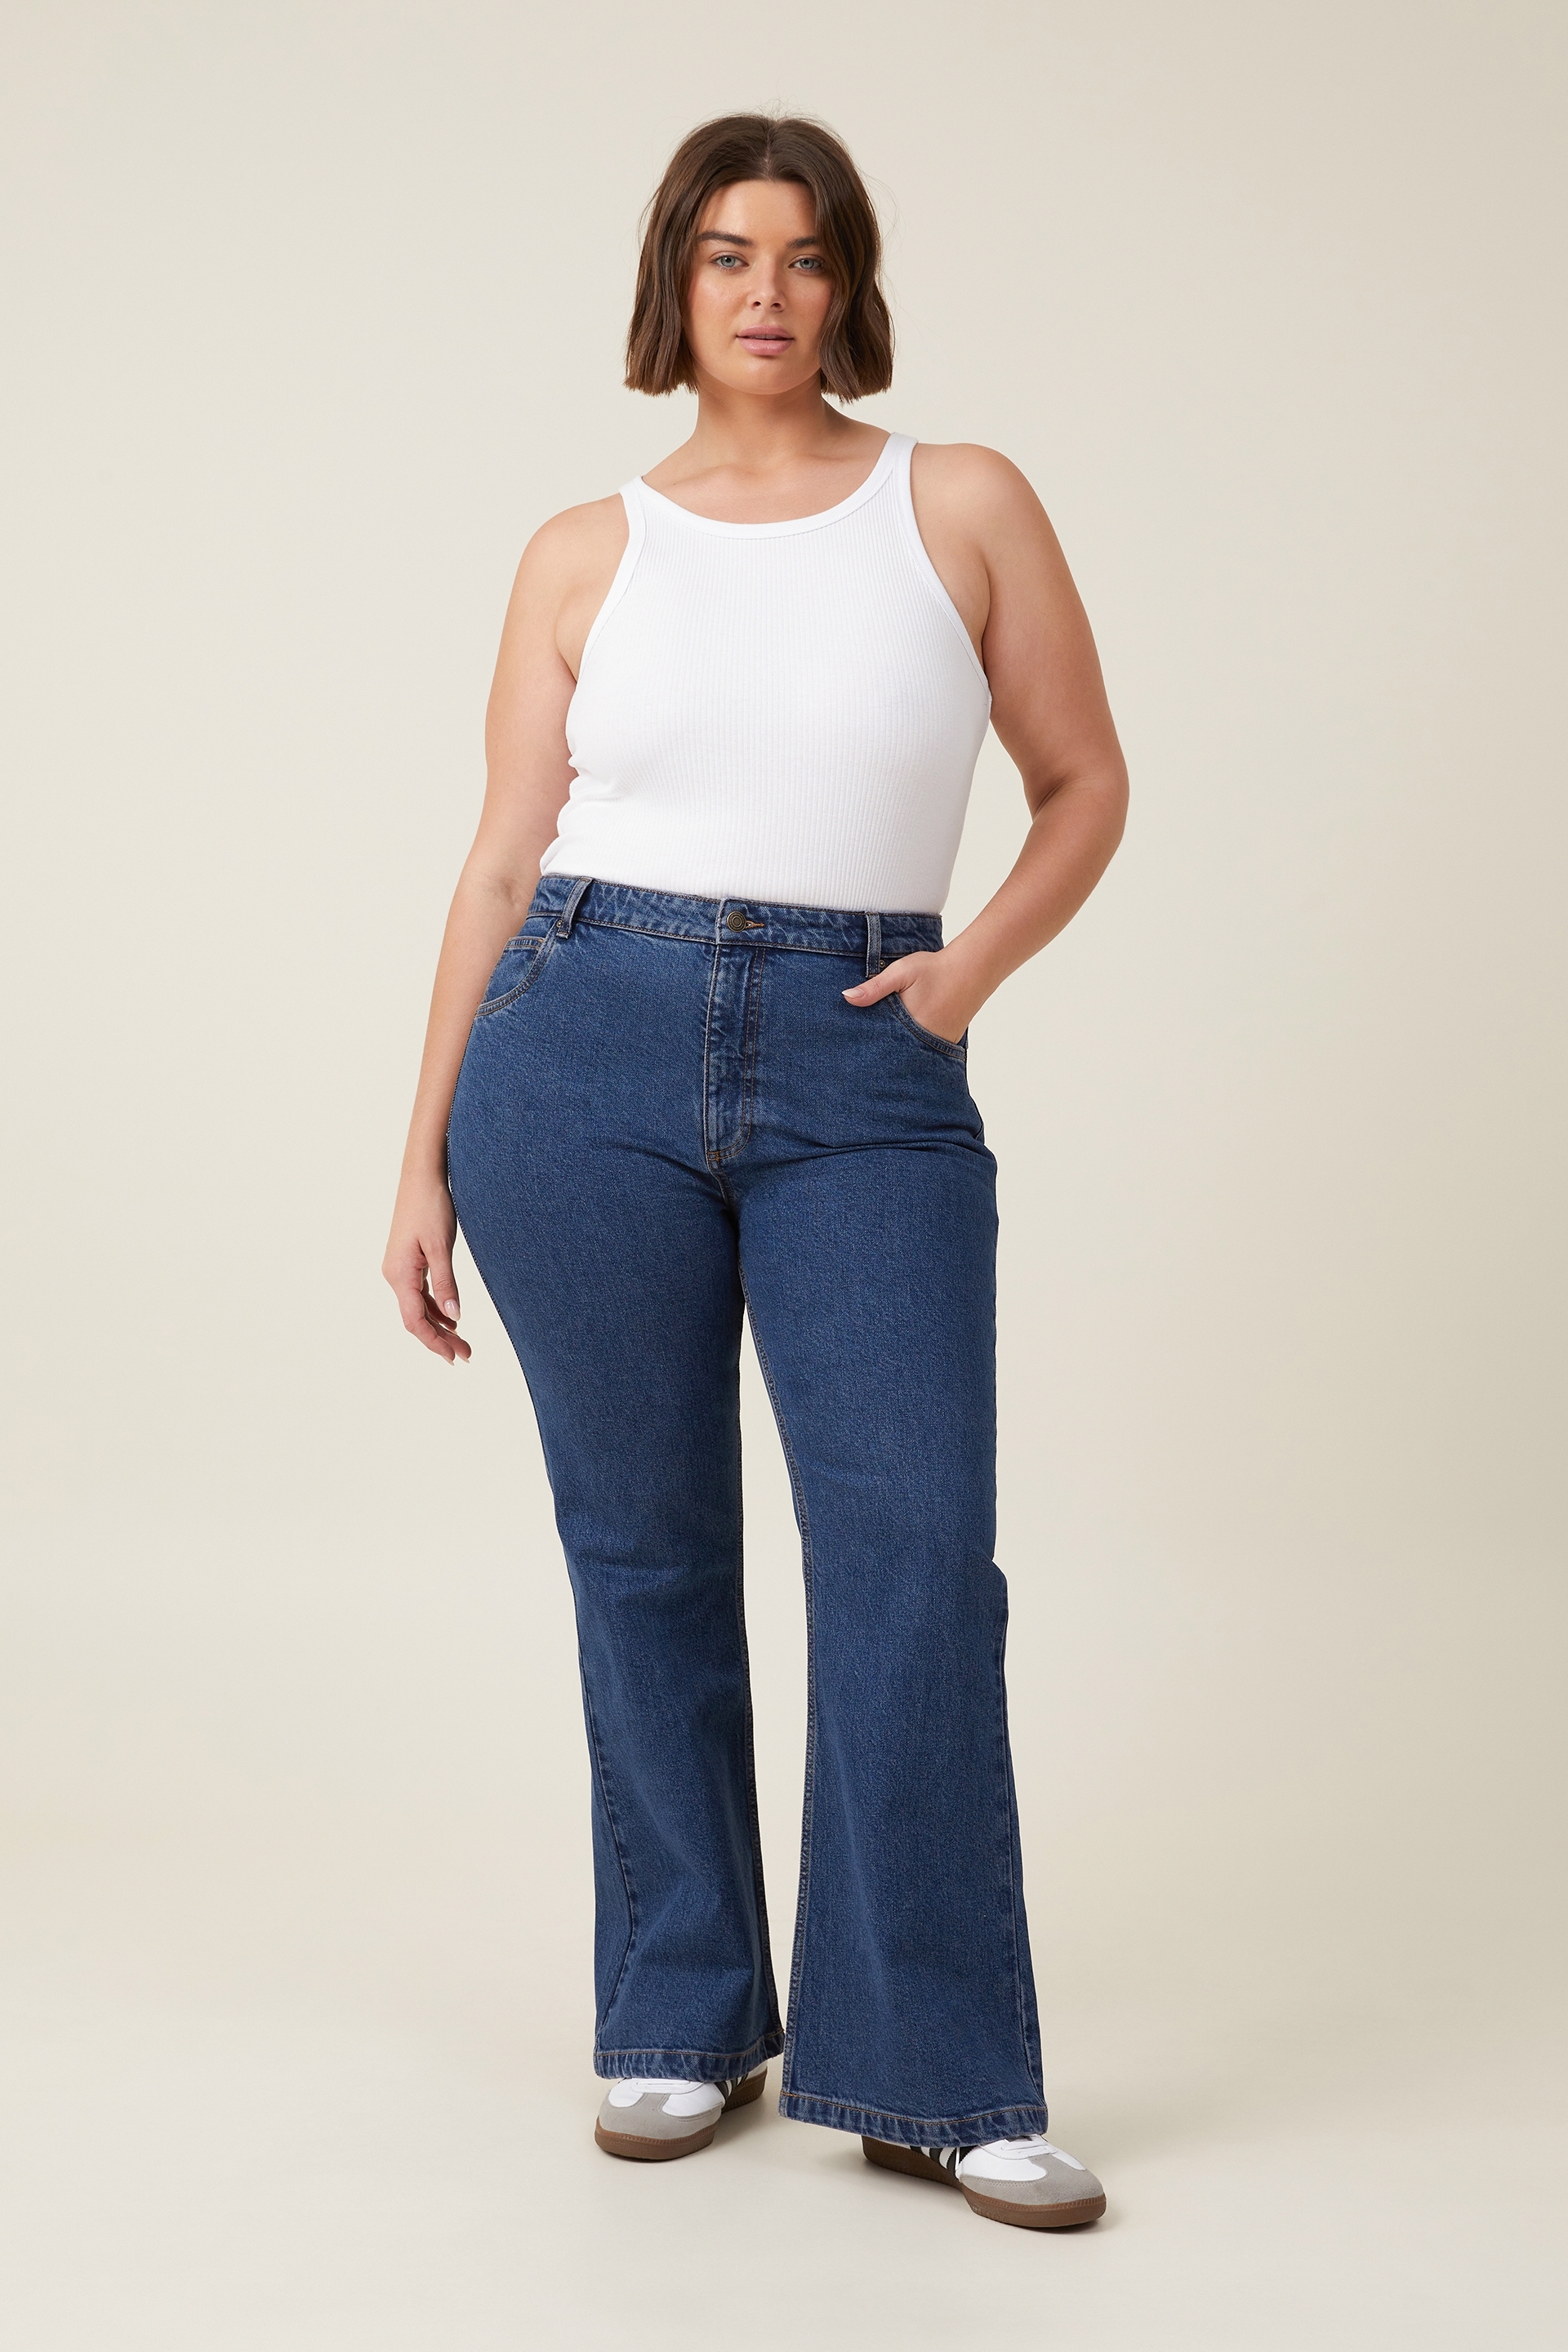 726 High Rise Flare Women's Jeans (plus Size) Medium Wash, 56% OFF